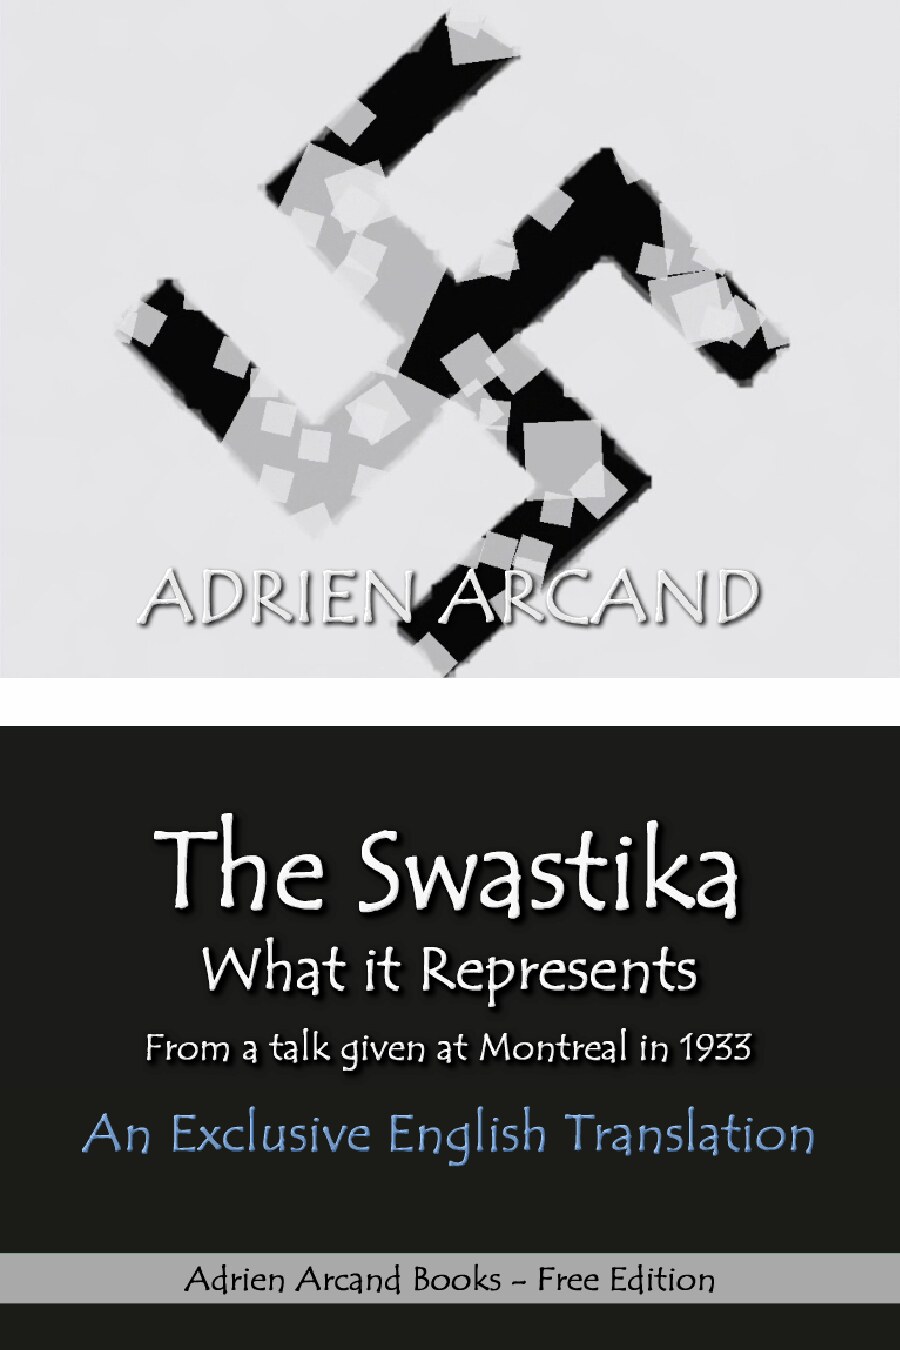 The Swastika - What it Represents